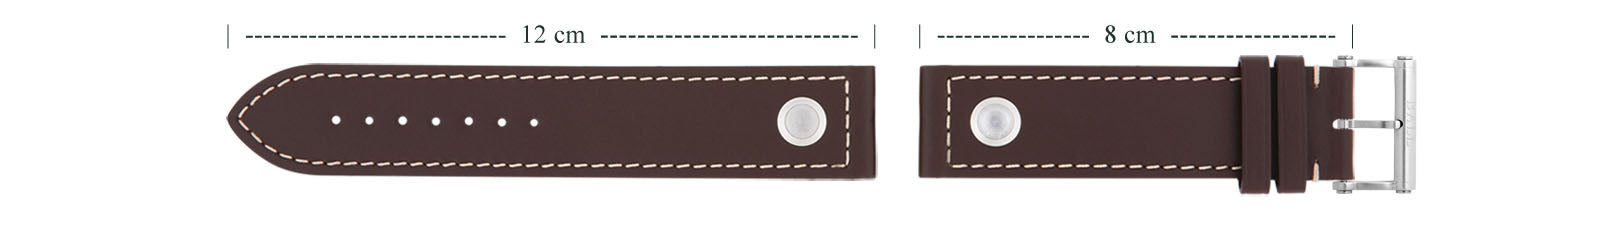 BALL Watch Company Brown calf leather 22mm - Polished pin buckle Replacement Band CUI-NM1080C-BR-22